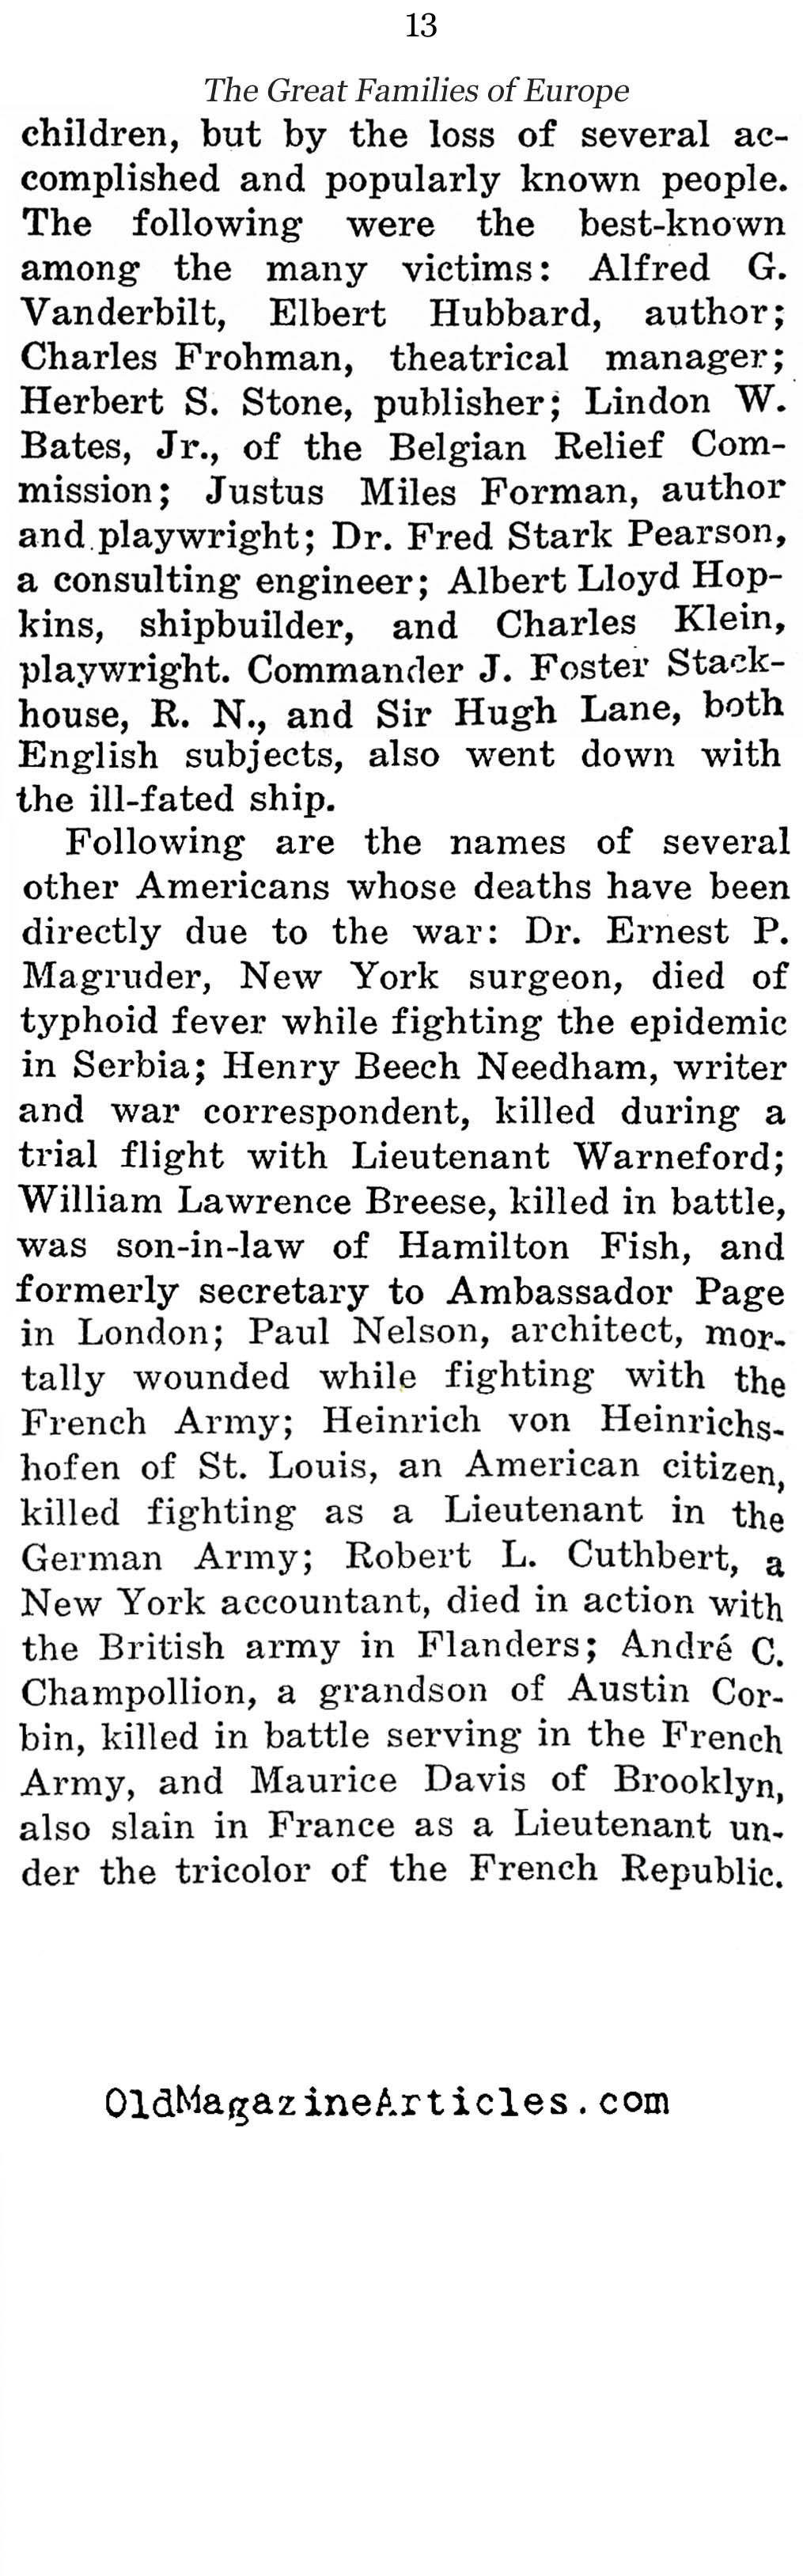 The Slaughter of the Aristocrats (NY Times, 1915)